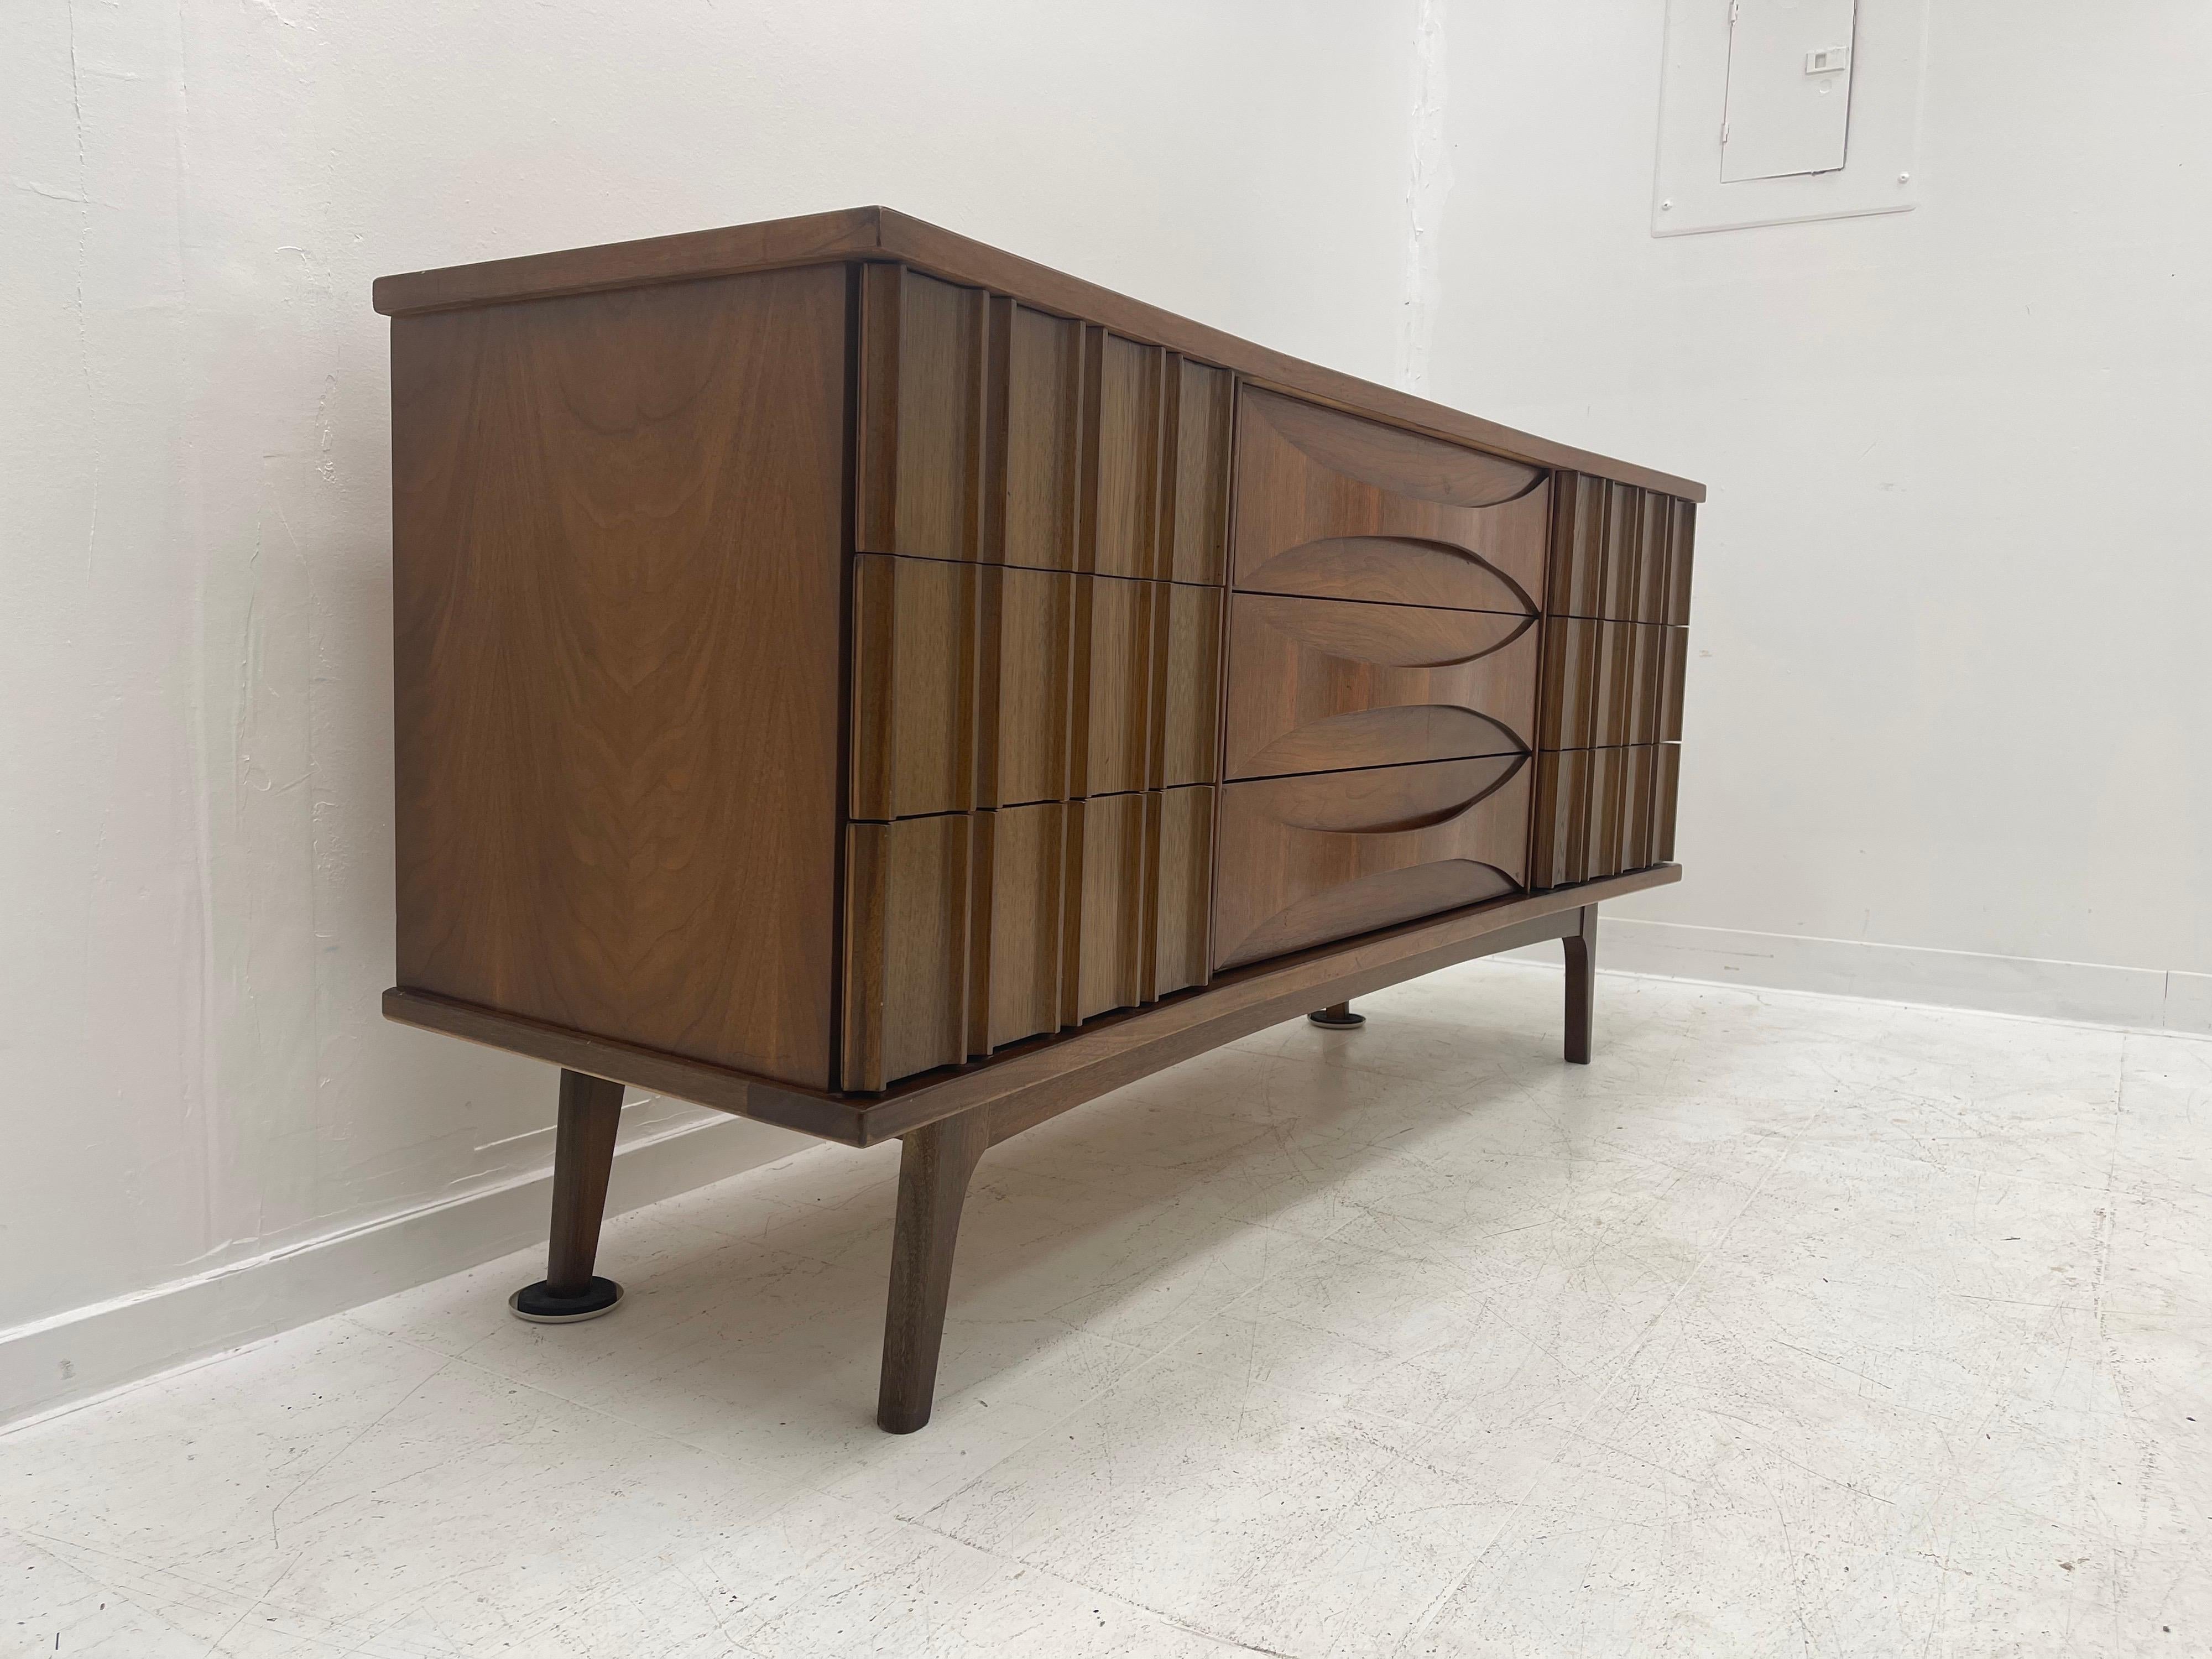 We have a beautiful mid century dresser set available. The set has clean-lines and looks very sophisticated. 
 
The set includes a tall boy, lowboy, and Endtable.

Tallboy Dimensions: 39